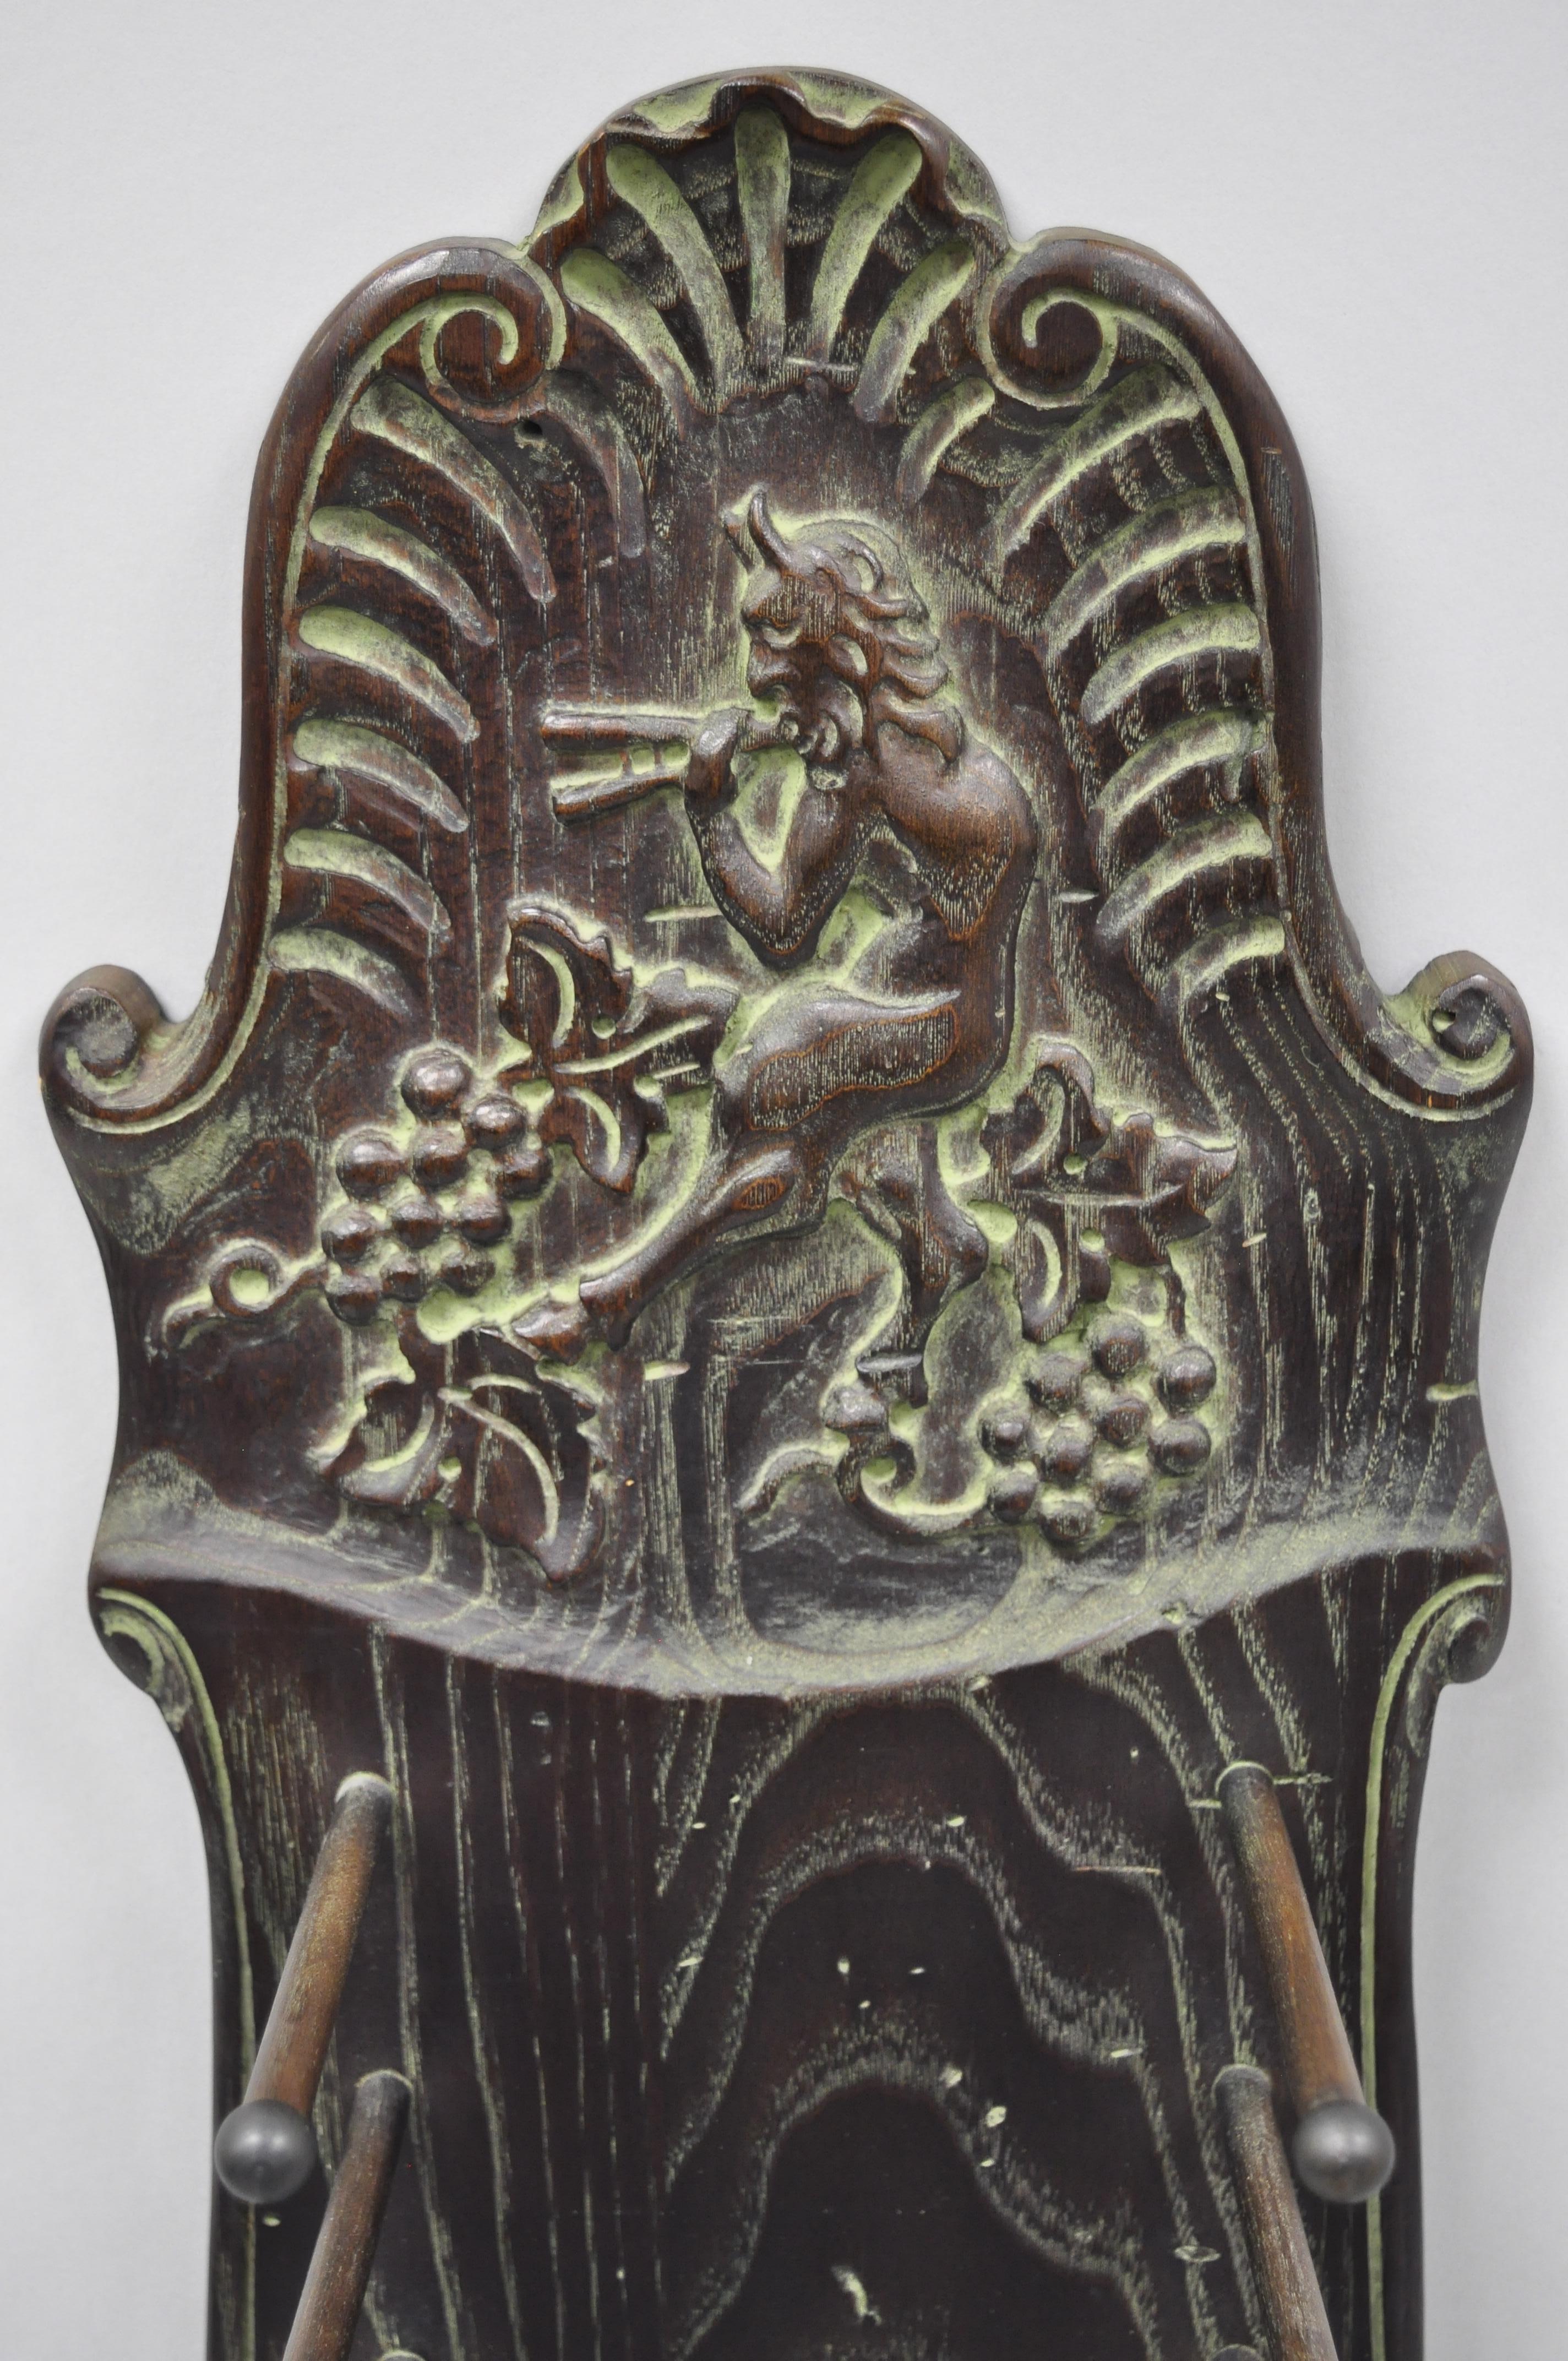 Gothic Carved Oakwood Mythical Fantasy Style Hanging Bookshelf Plate Holder with Satyr